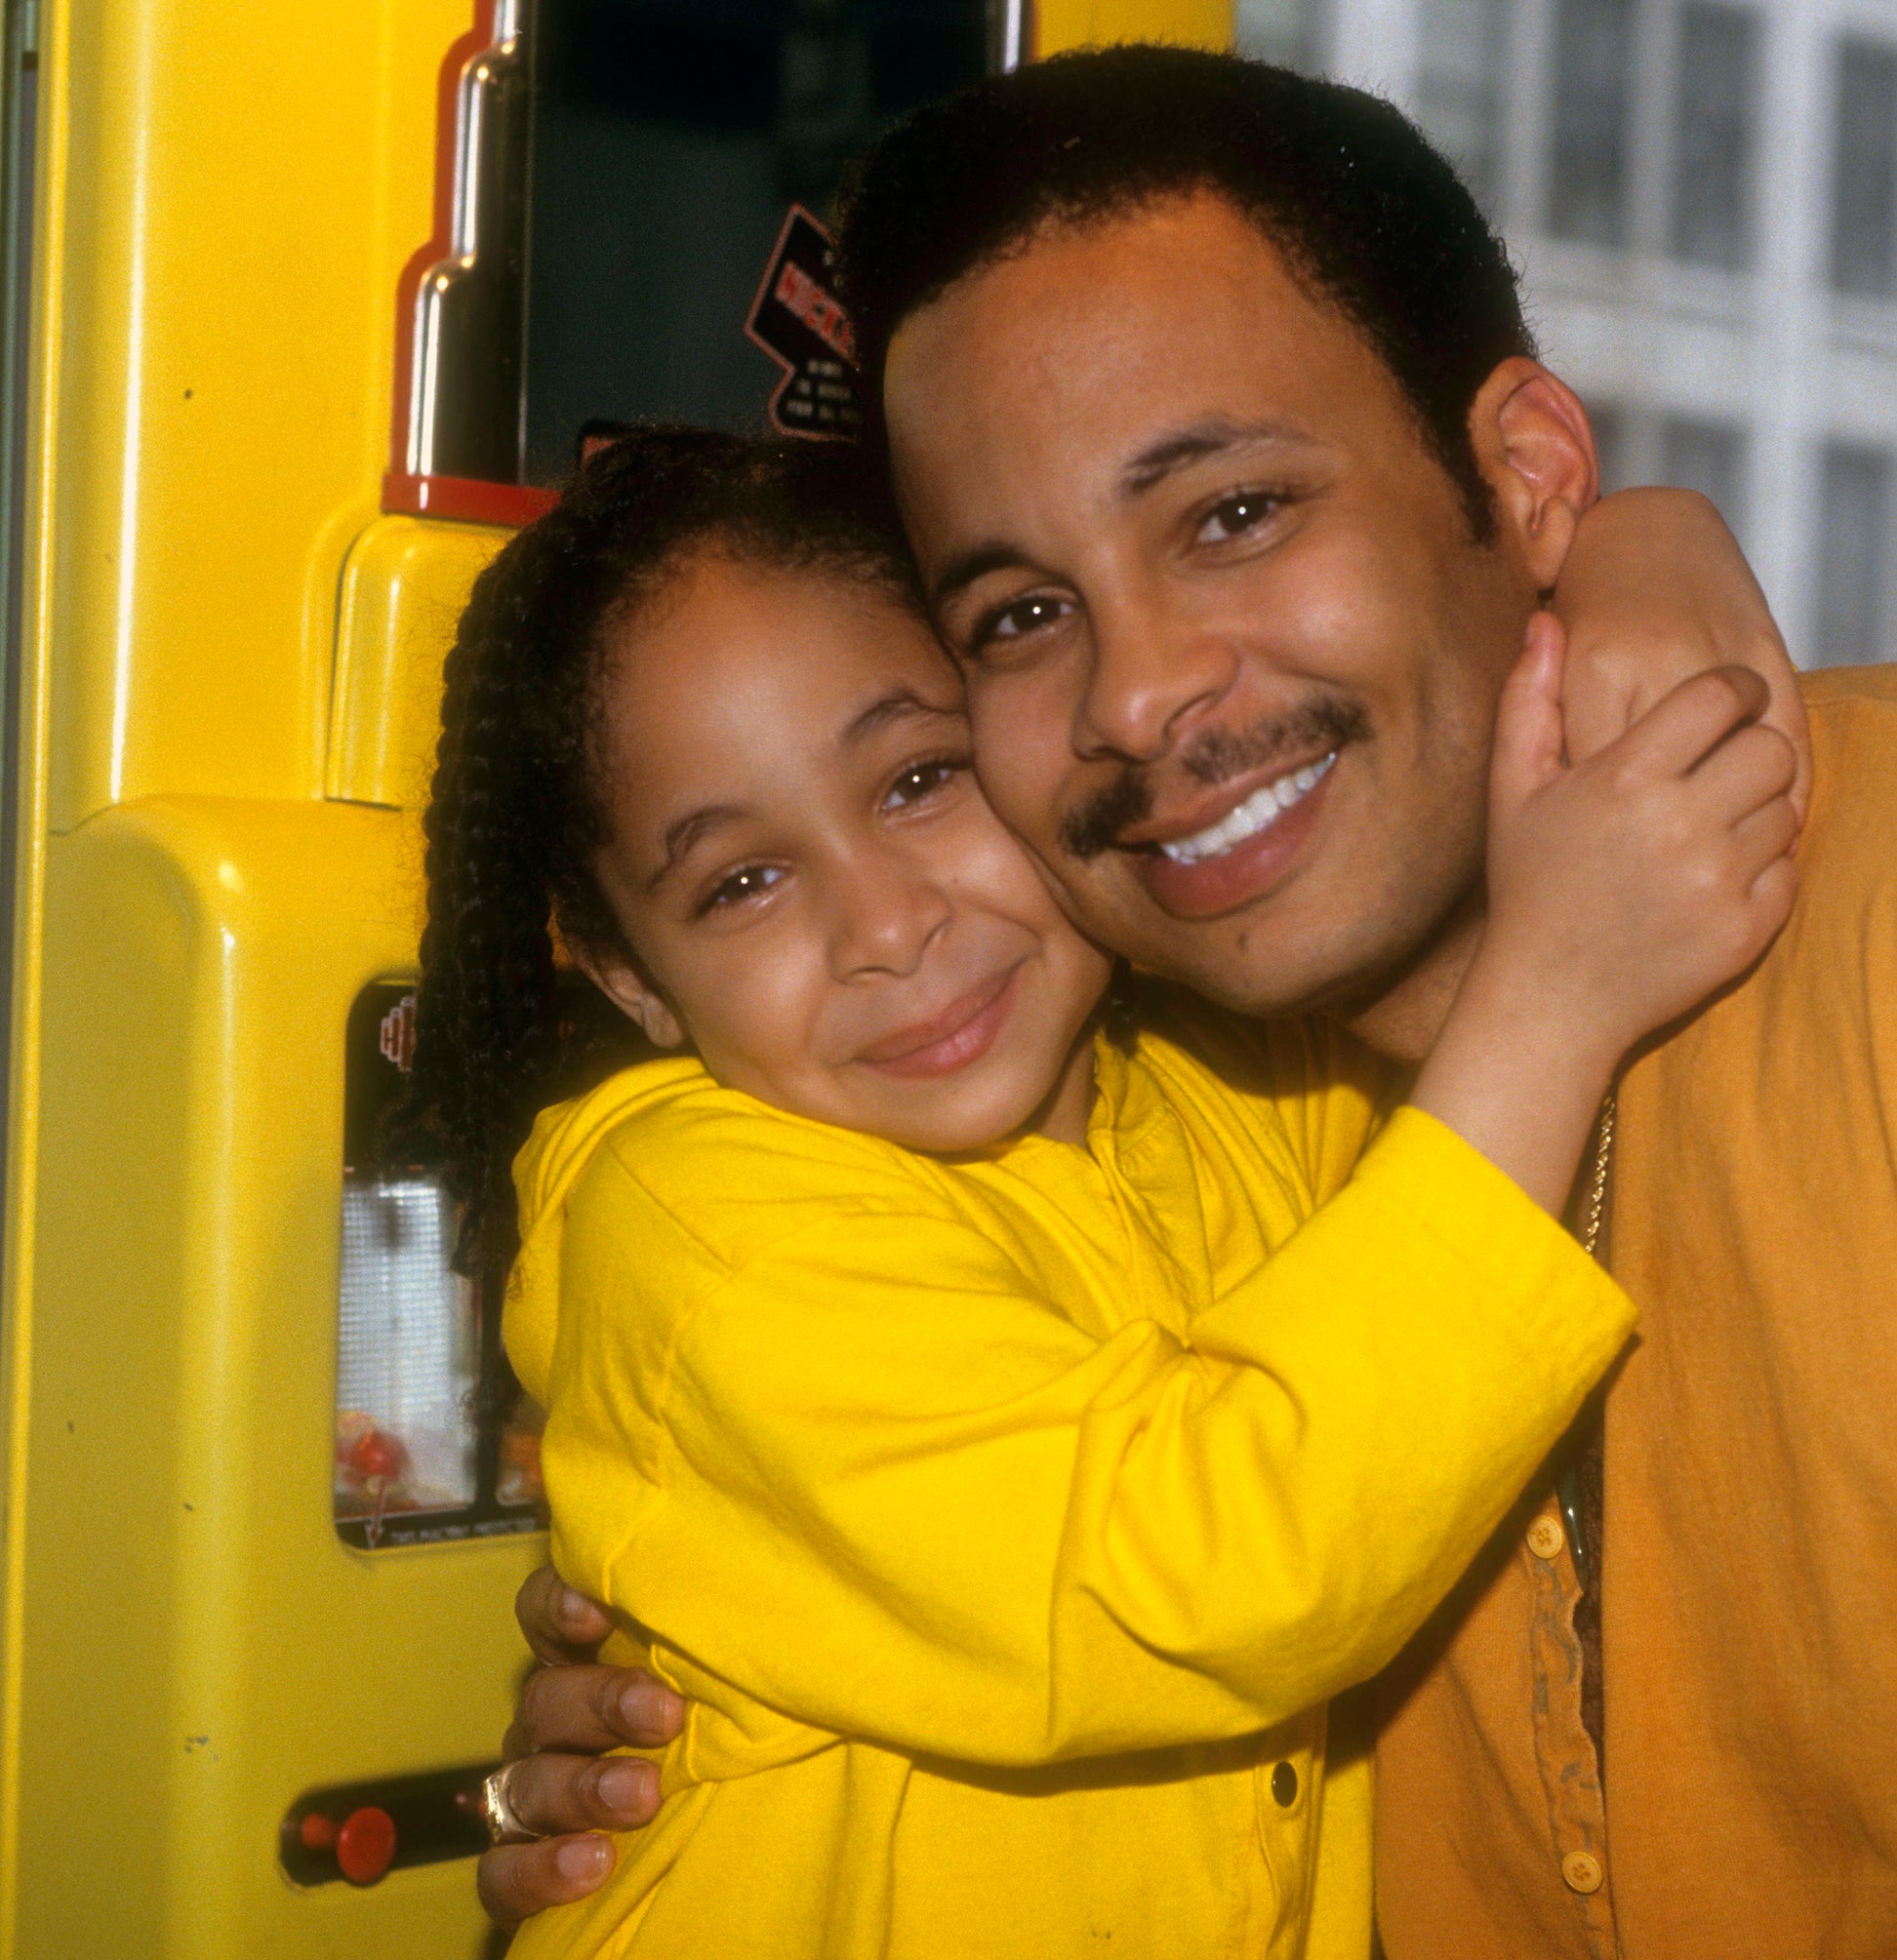 Close-up of Raven-Symoné as a child and her dad embracing